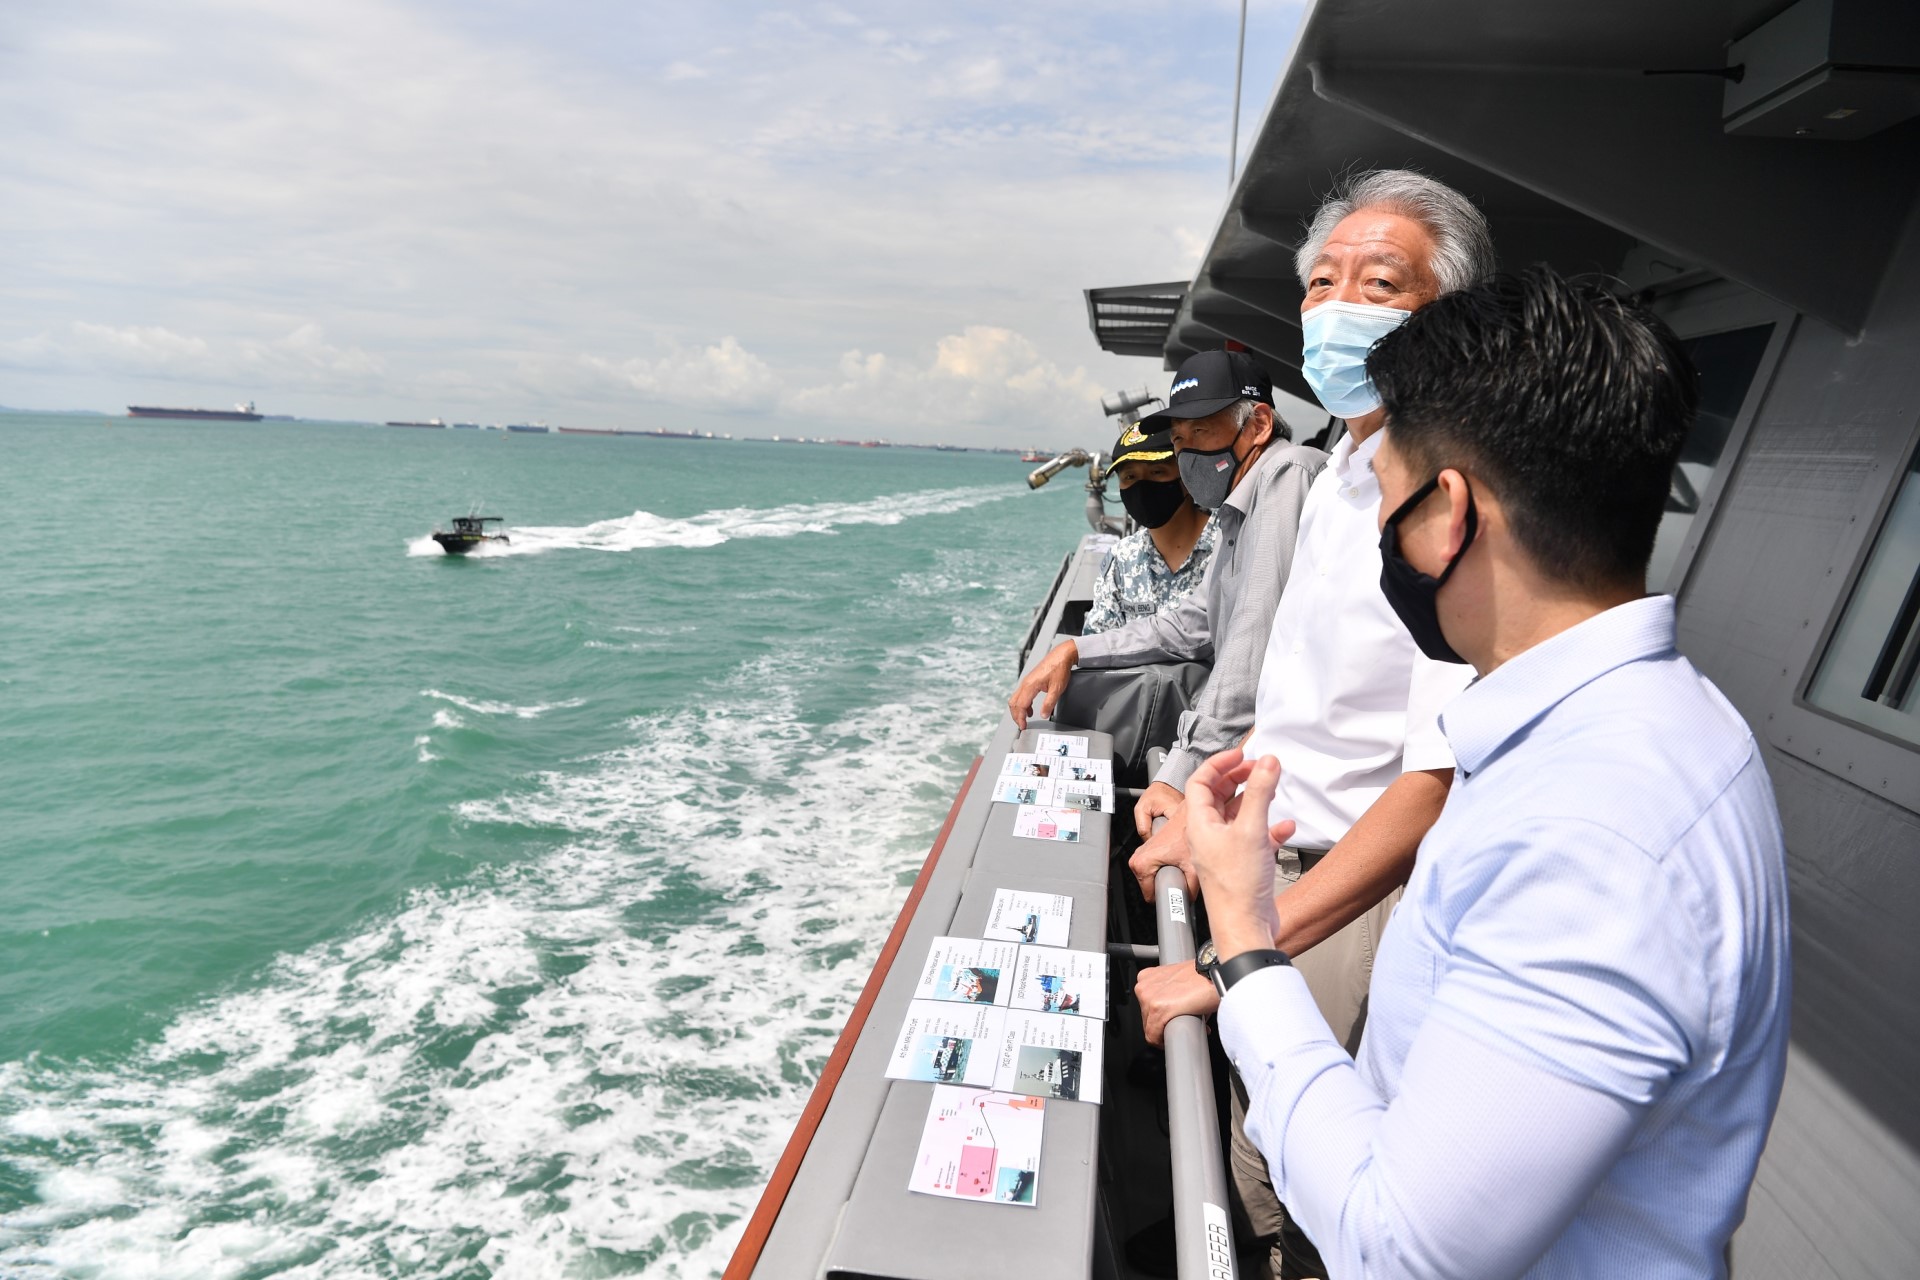 Senior Minister and Coordinating Minister for National Security Mr Teo Chee Hean (second from right), accompanied by Minister for Defence Dr Ng Eng Hen (second from left) witnessing a sea demonstration on RSS Fortitude